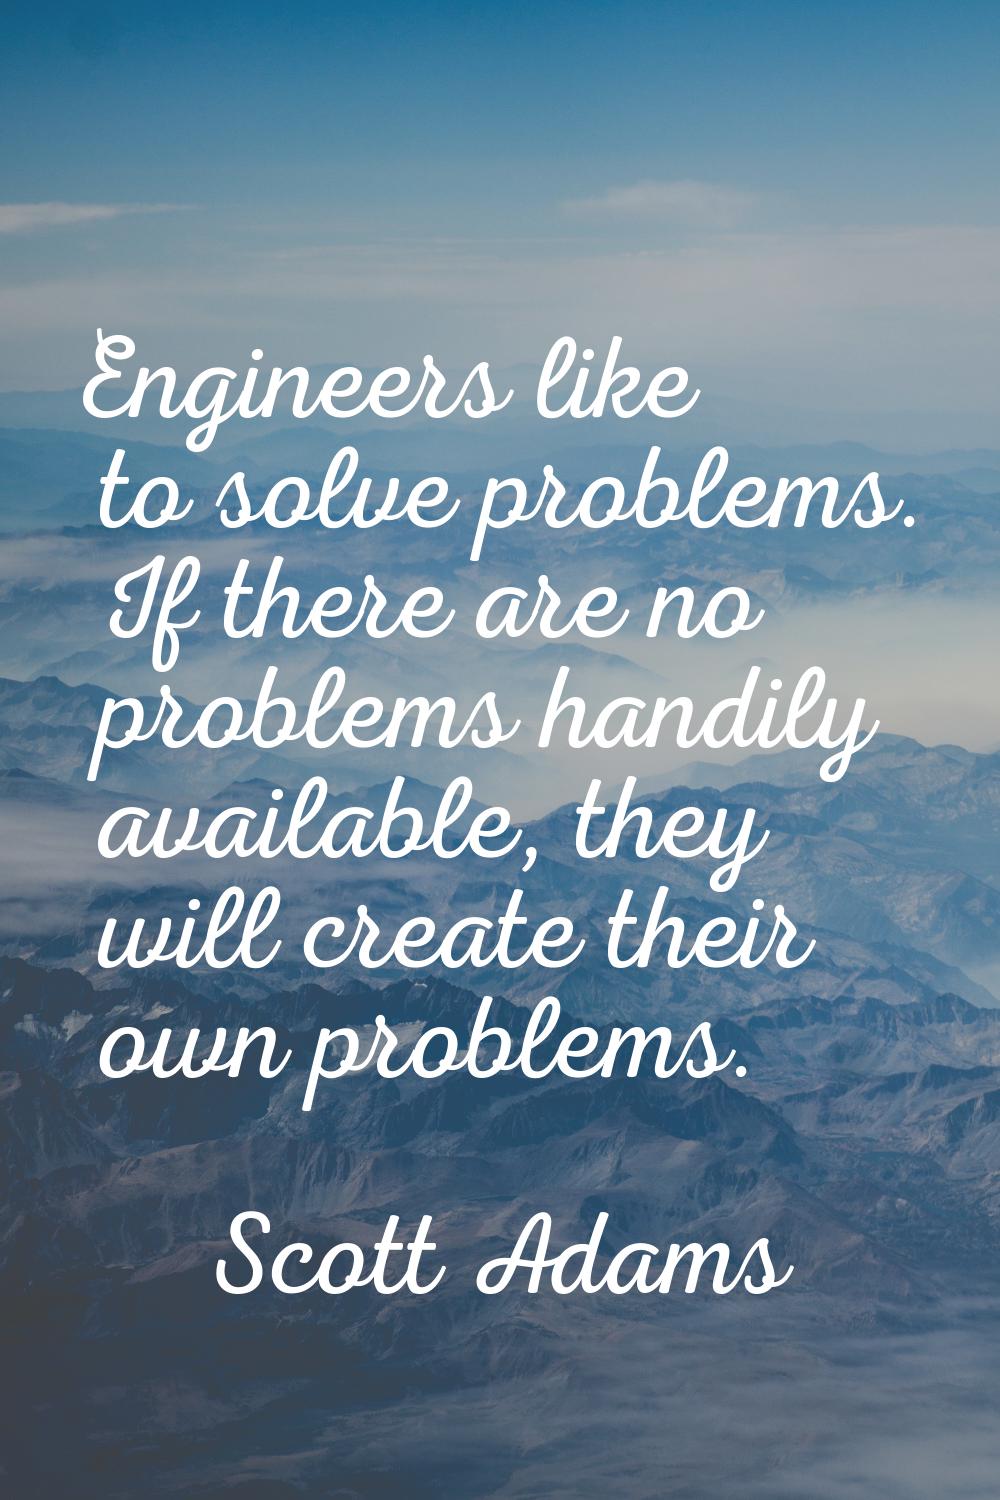 Engineers like to solve problems. If there are no problems handily available, they will create thei